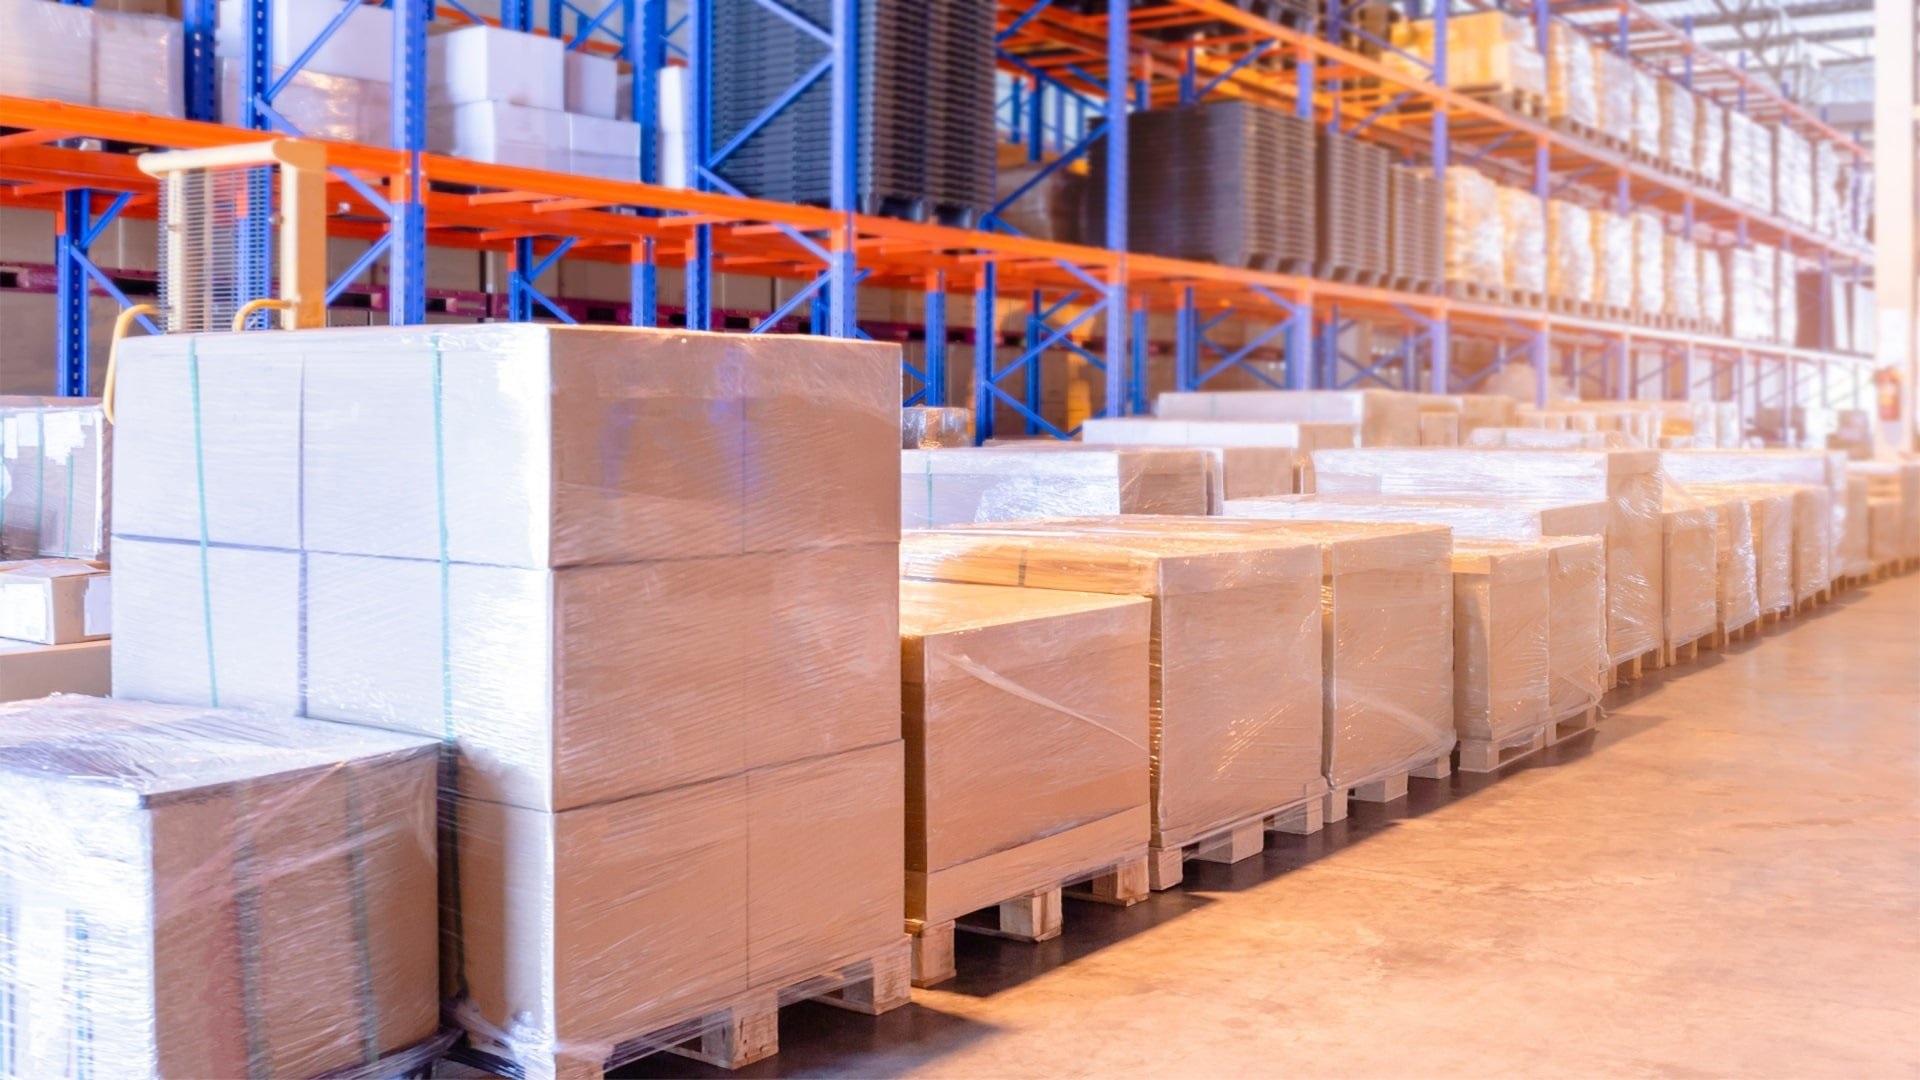 How Slotting Can Help You Maximise Your Inventory?